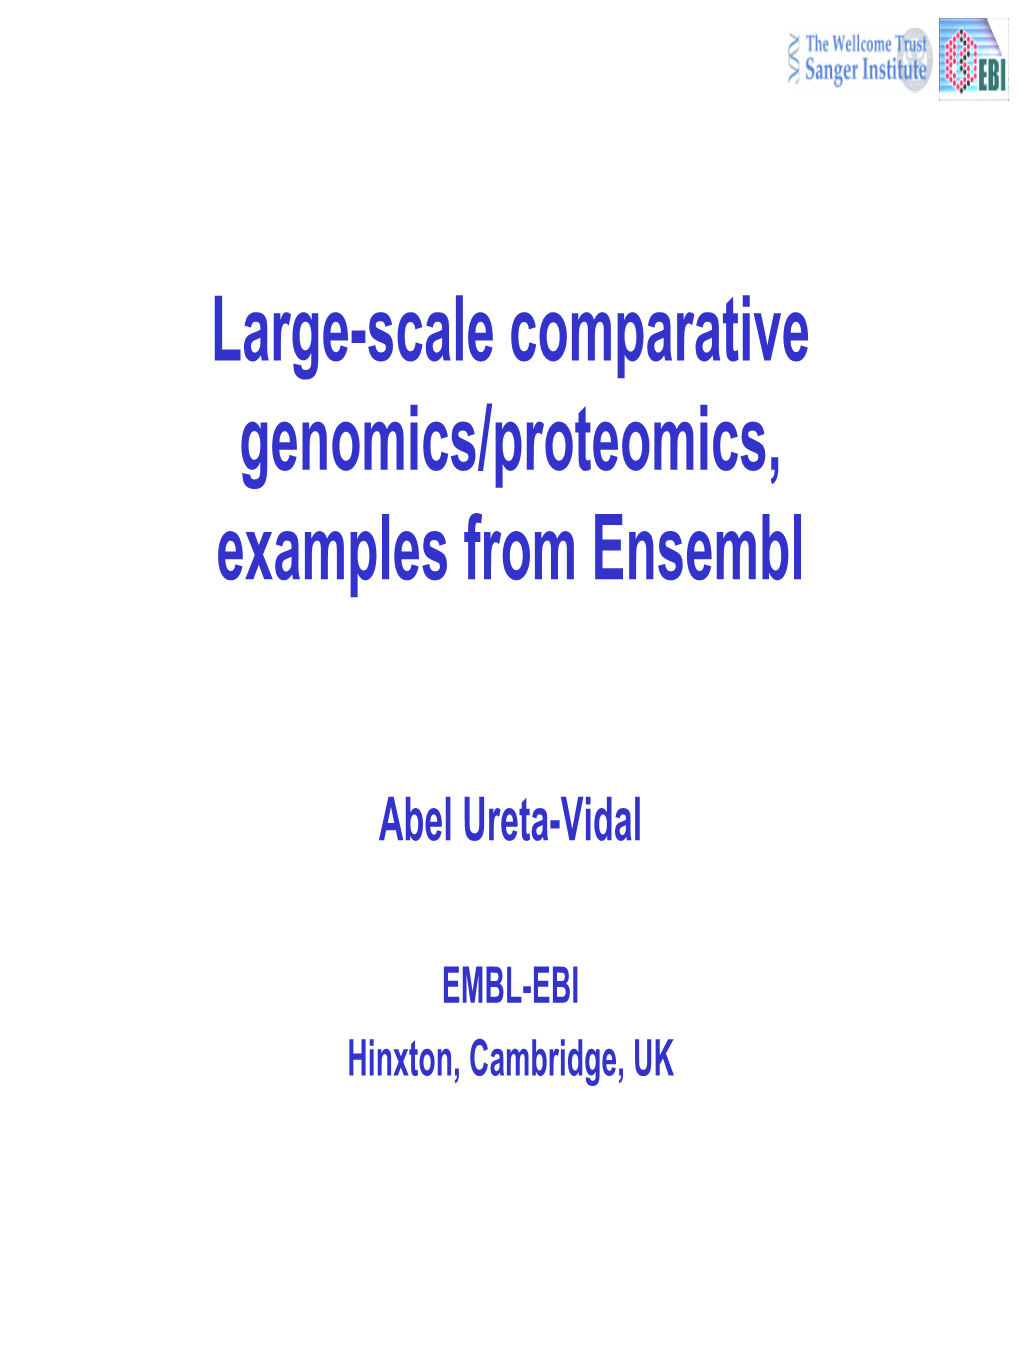 Large-Scale Comparative Genomics/Proteomics, Examples from Ensembl